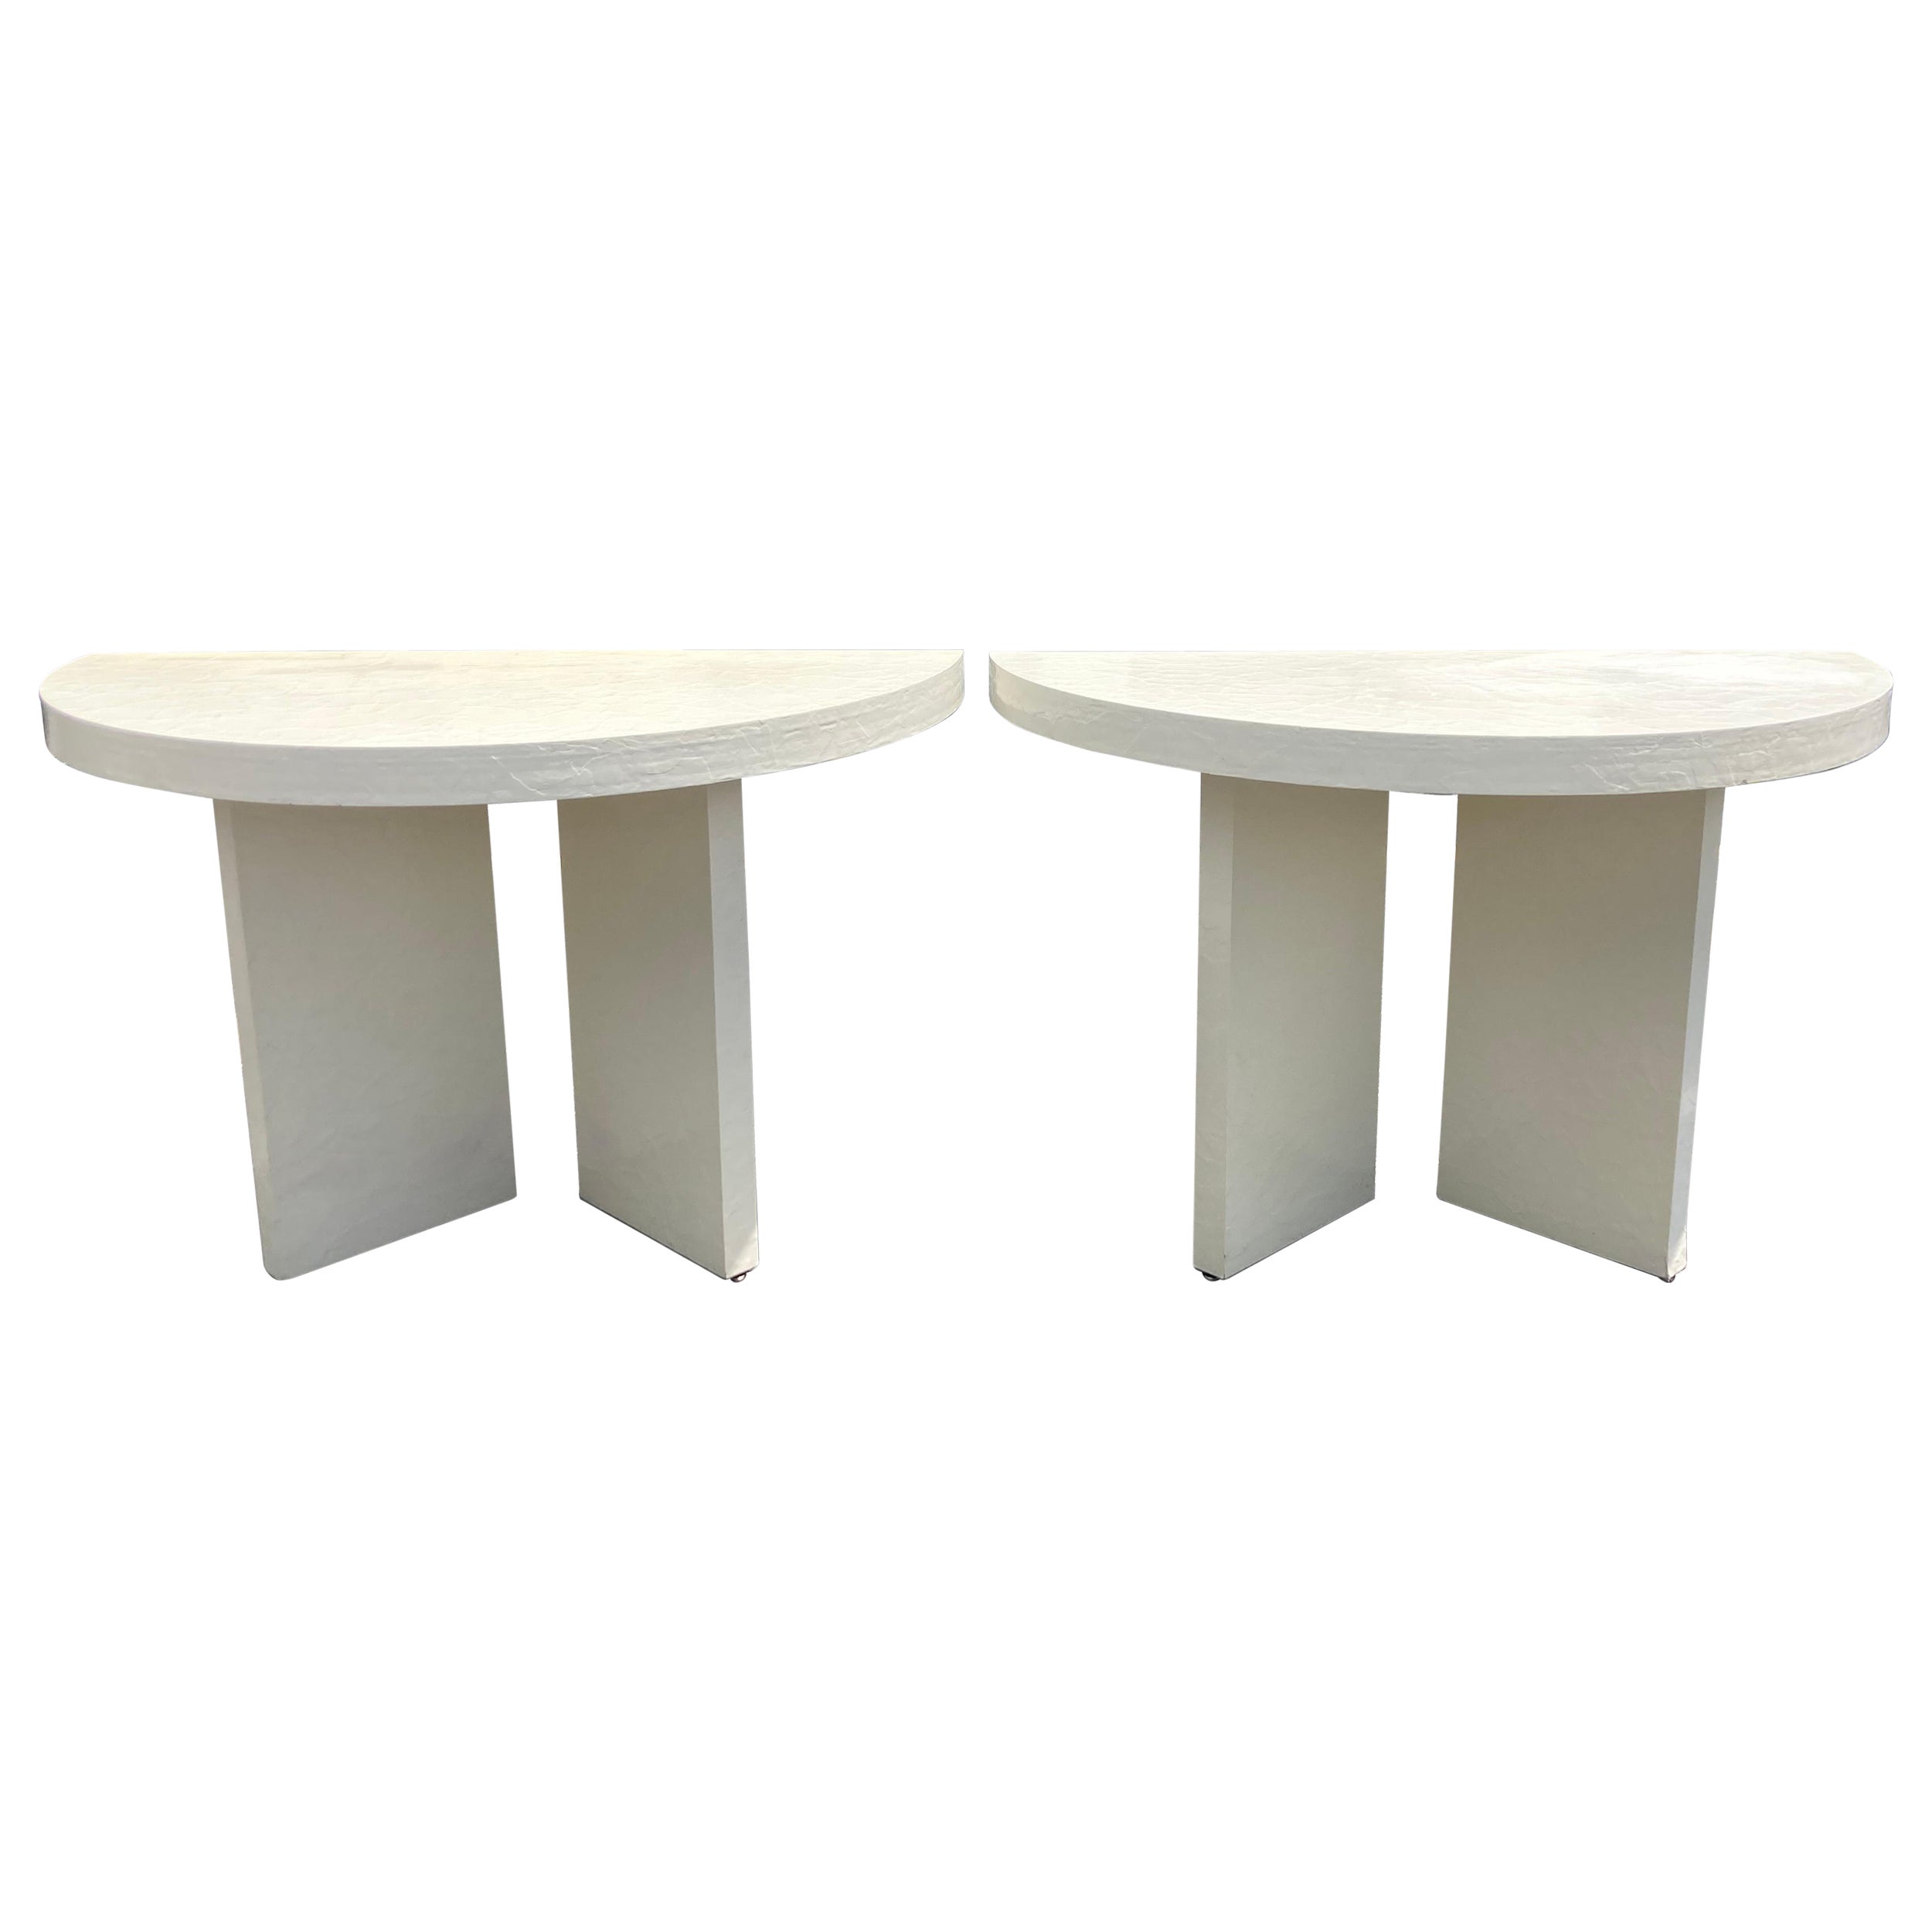 Pair of Demi-Lune Tables, Semi Circle, 1980s For Sale